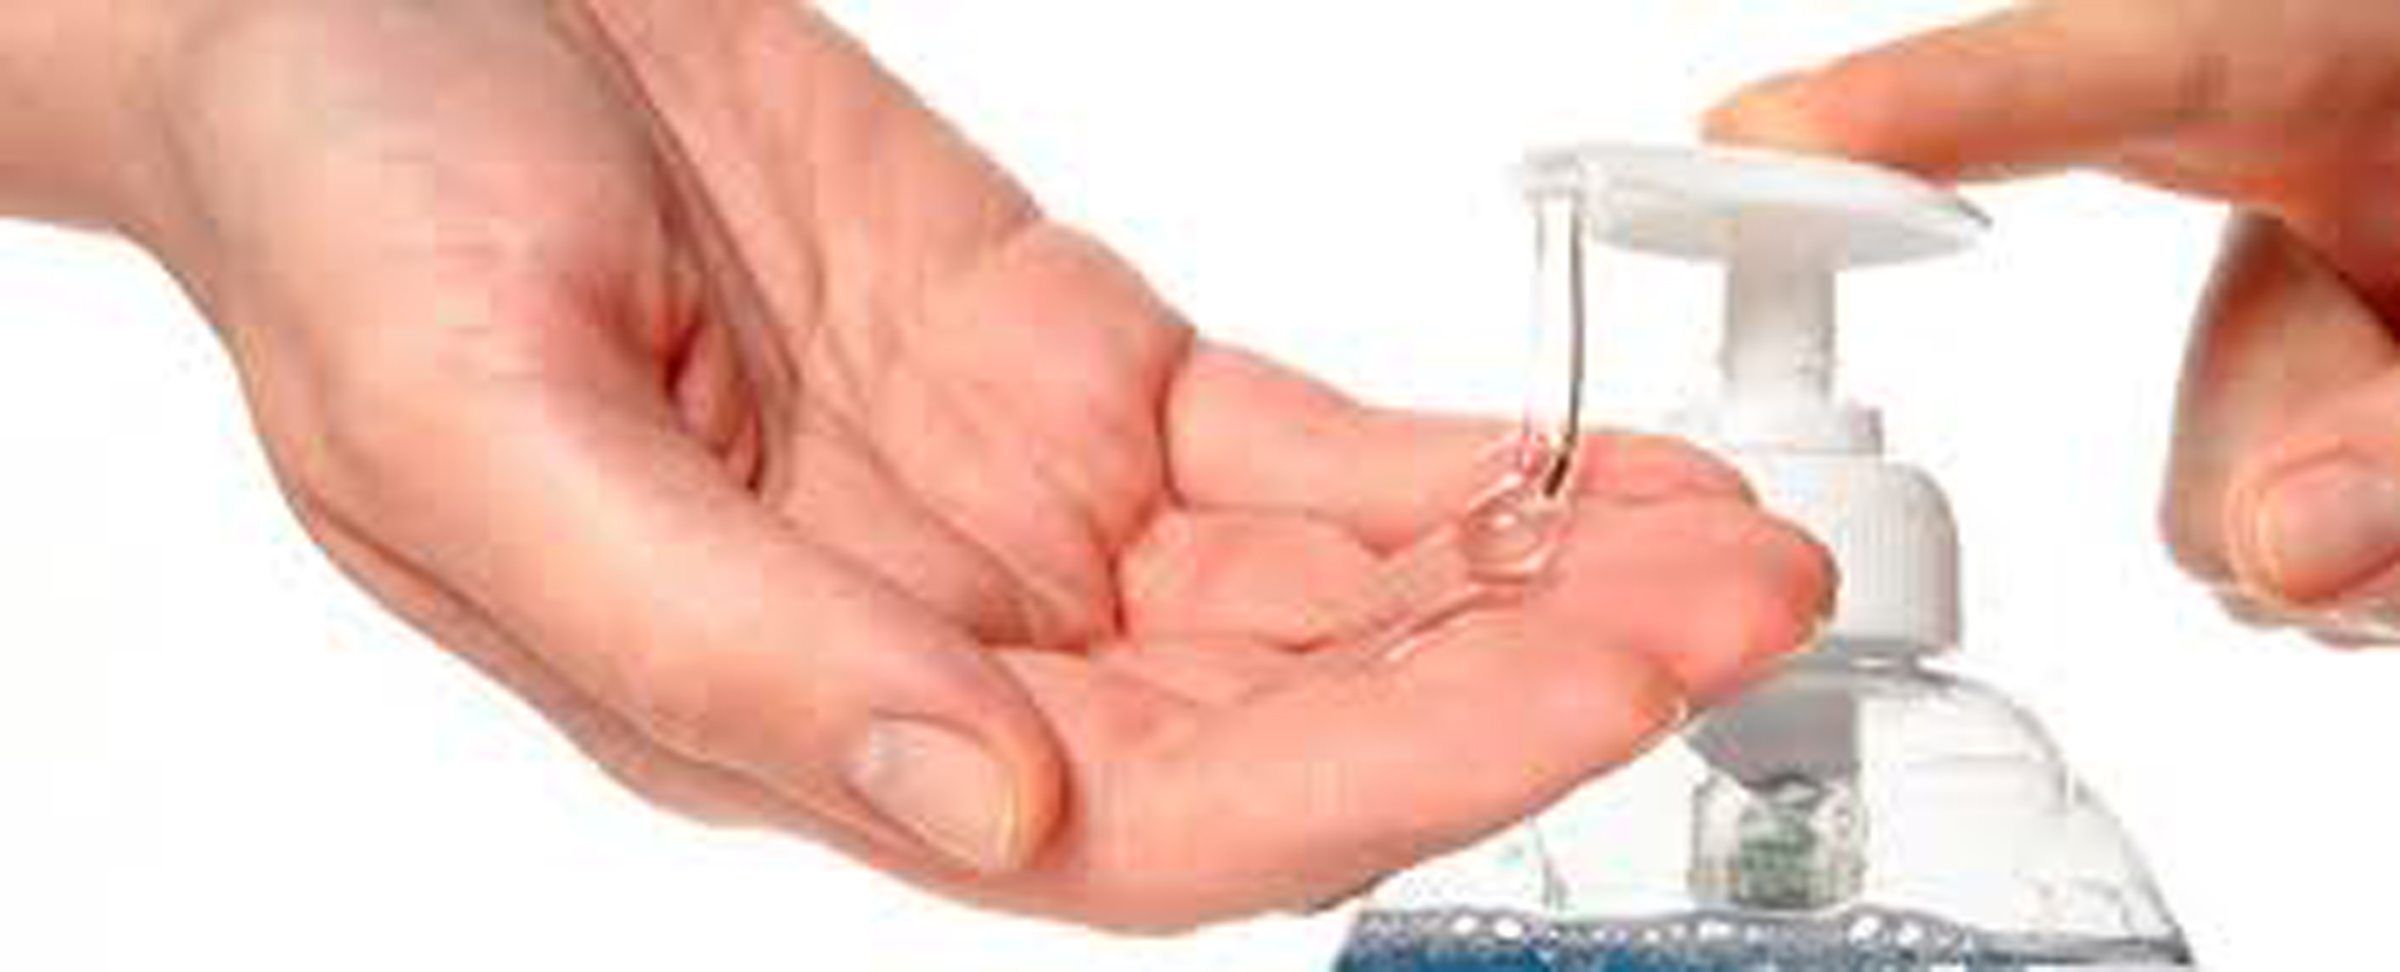 Examining the adverse effects of hand sanitizers